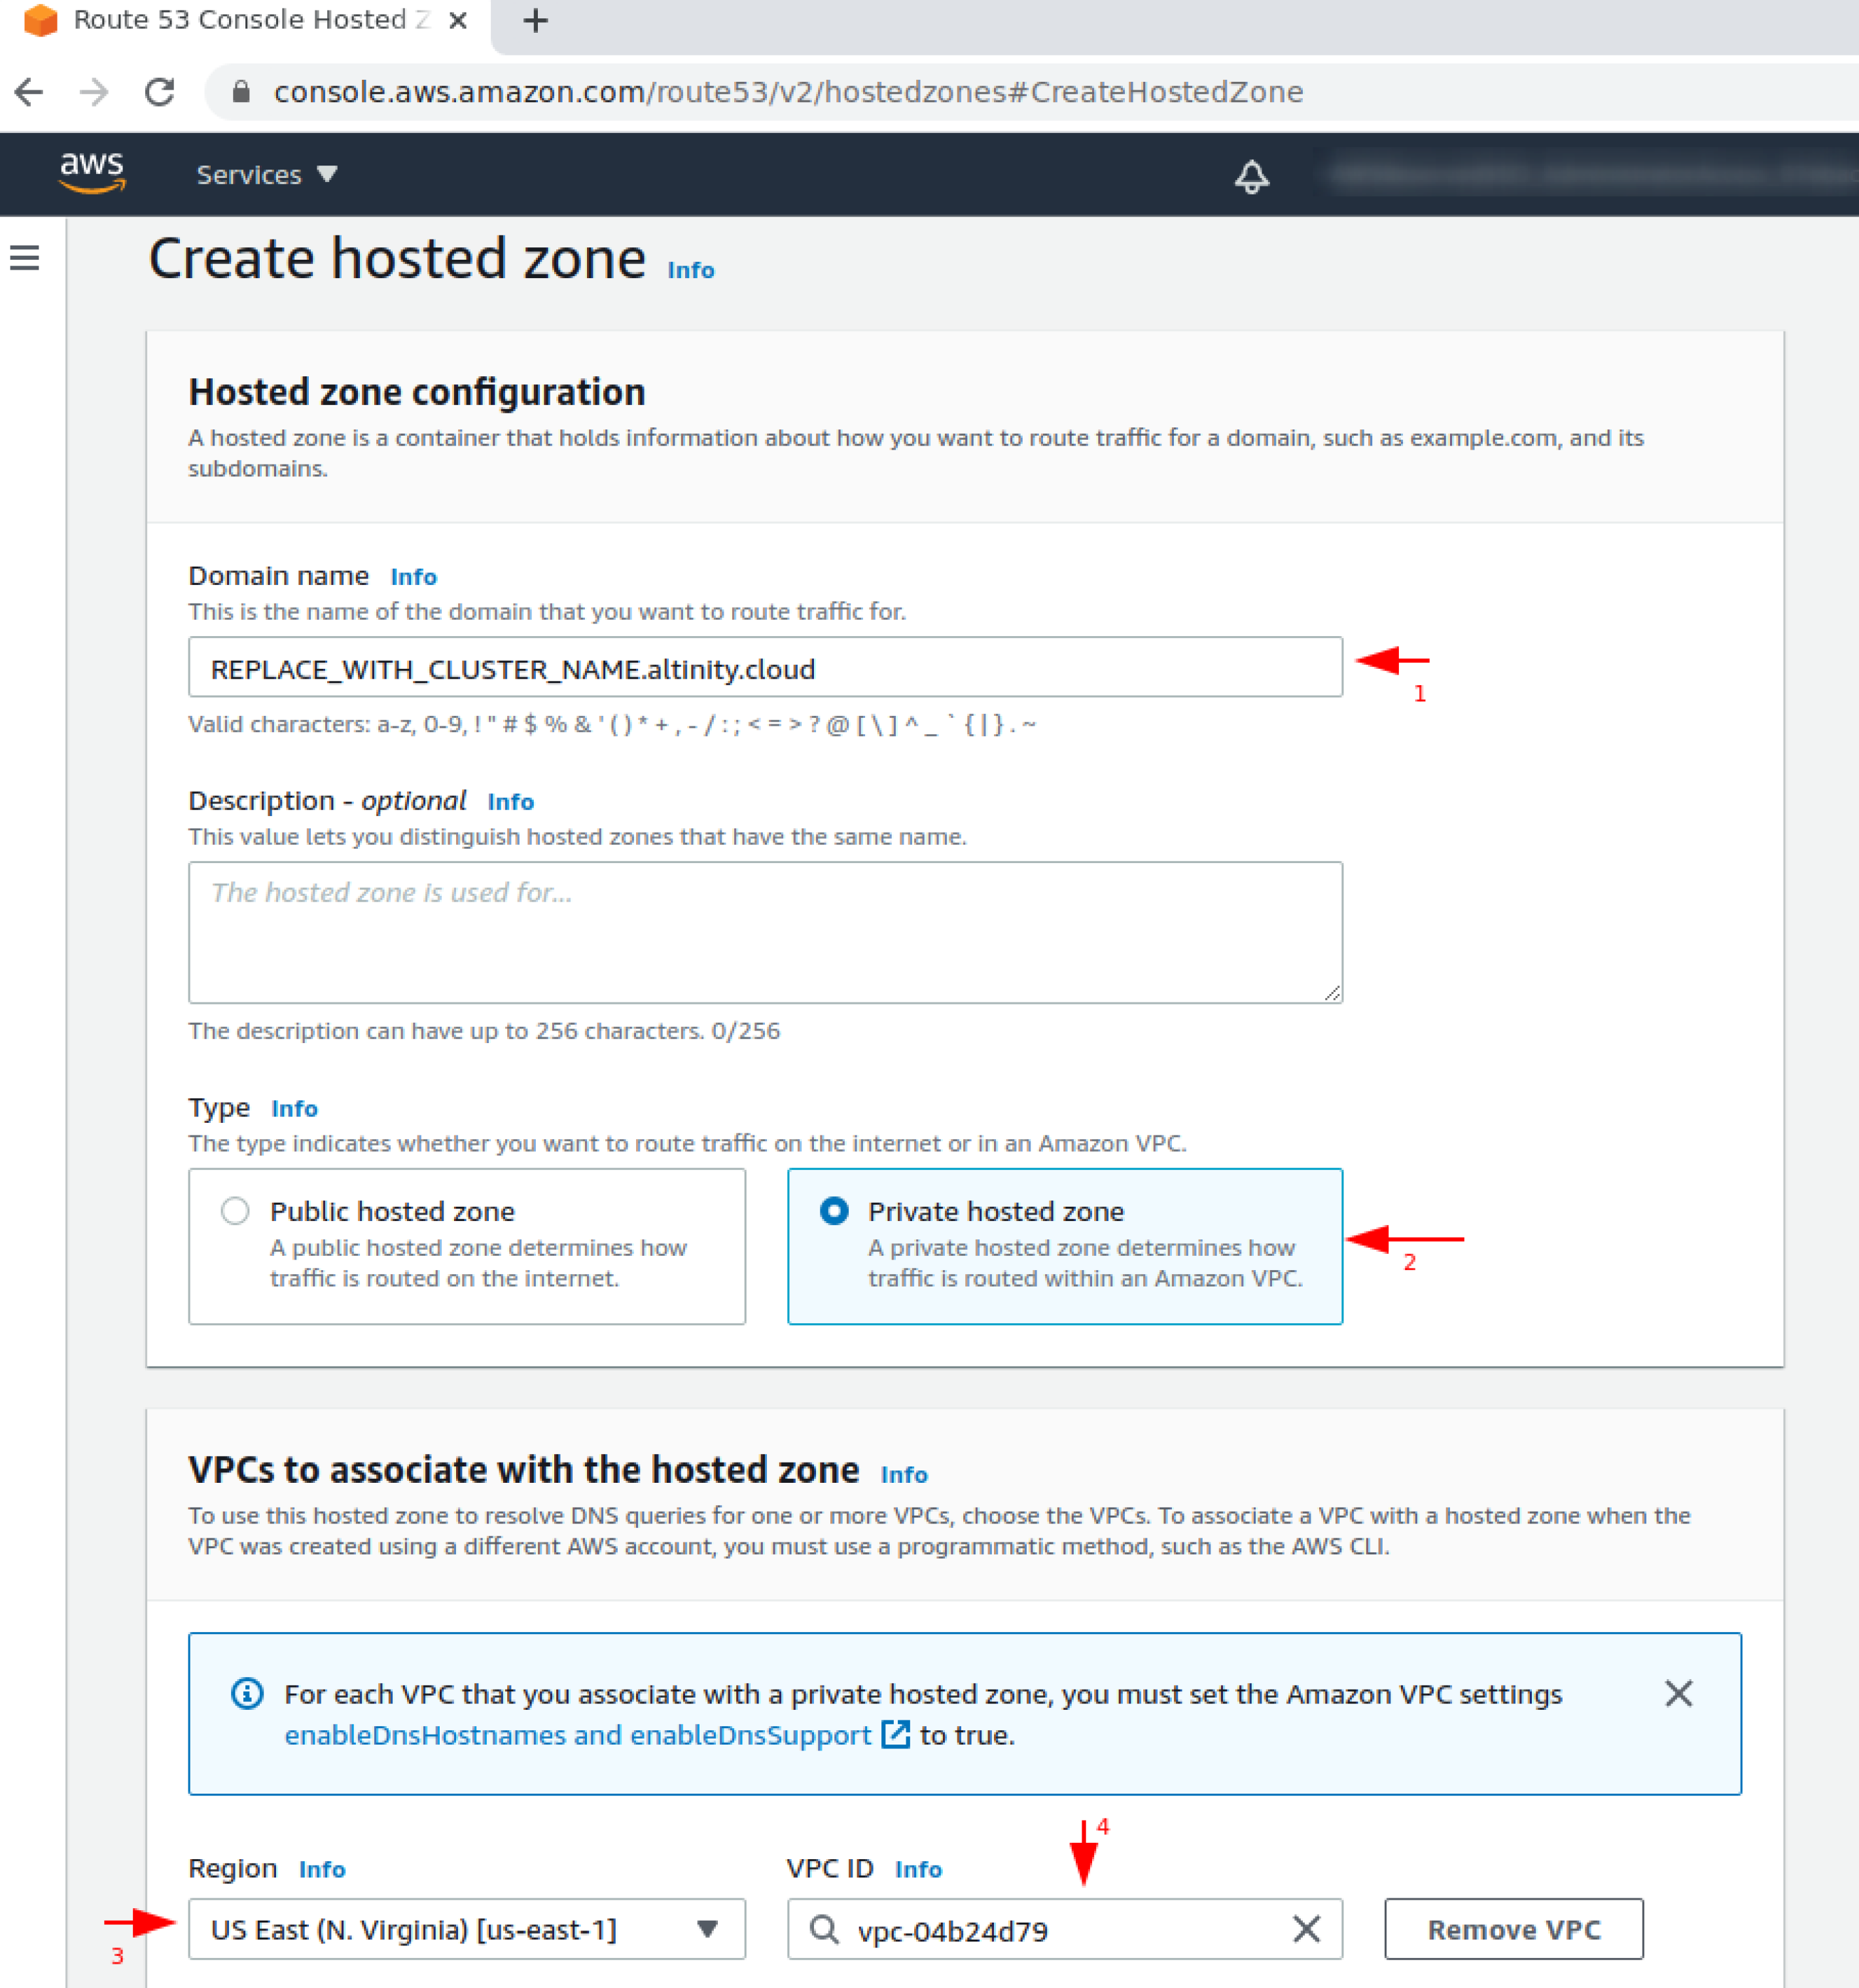 Create hosted zone details